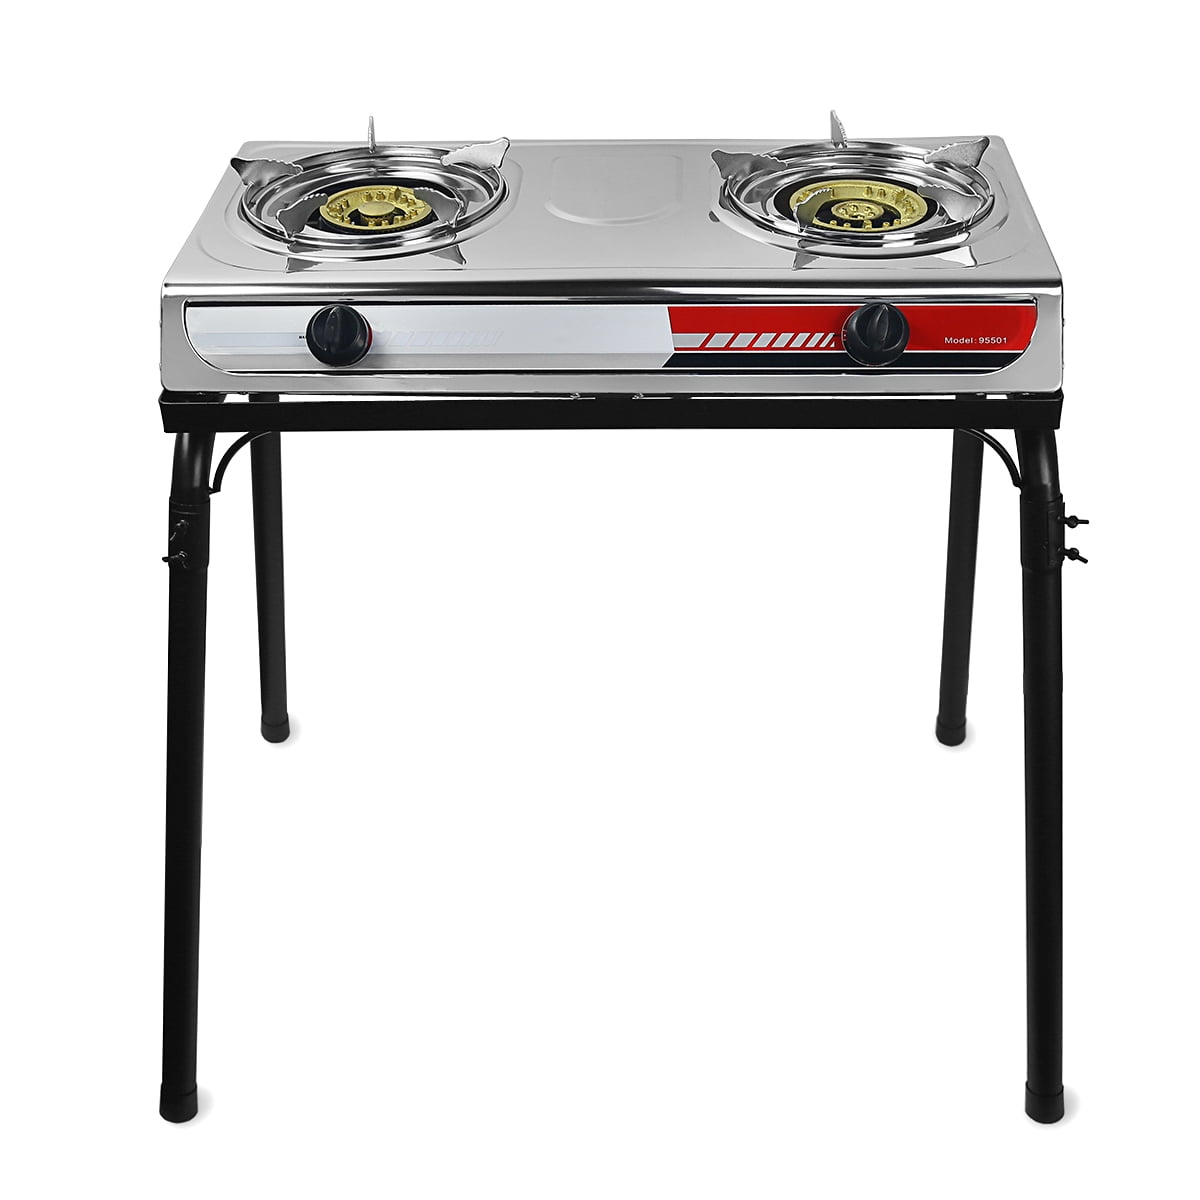 Outdoor Portable Multi Fuel Gas Stove Stainless Steel Camping Cooking burner. 